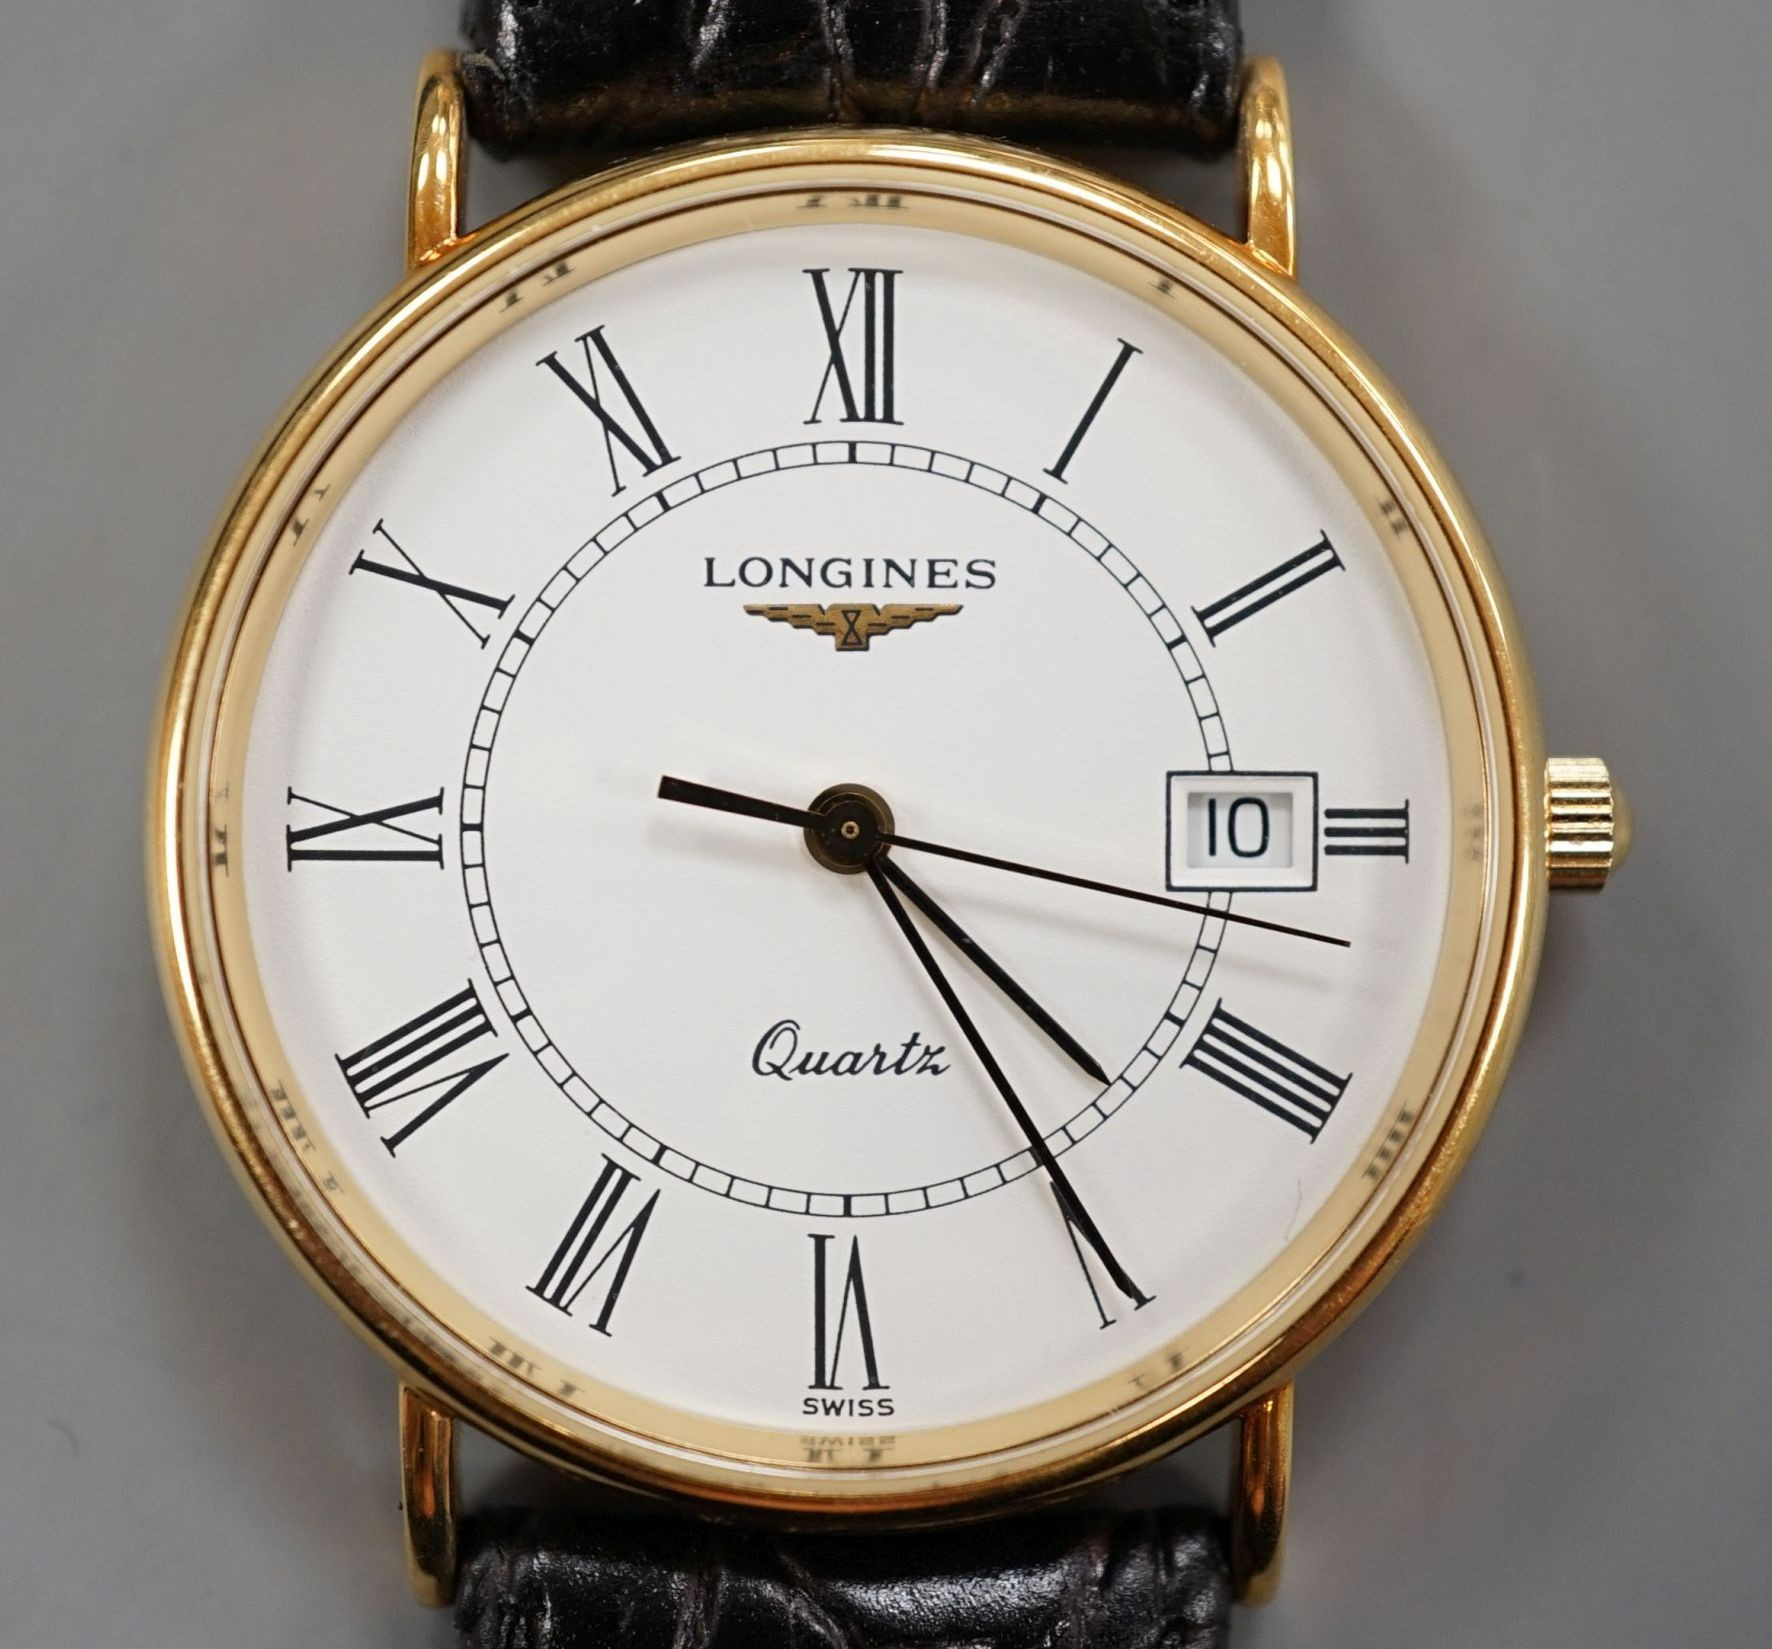 A gentleman's 1999 18ct Longines quartz date wrist watch, with box and papers, case diameter 33mm, gross weight 29.1 grams.